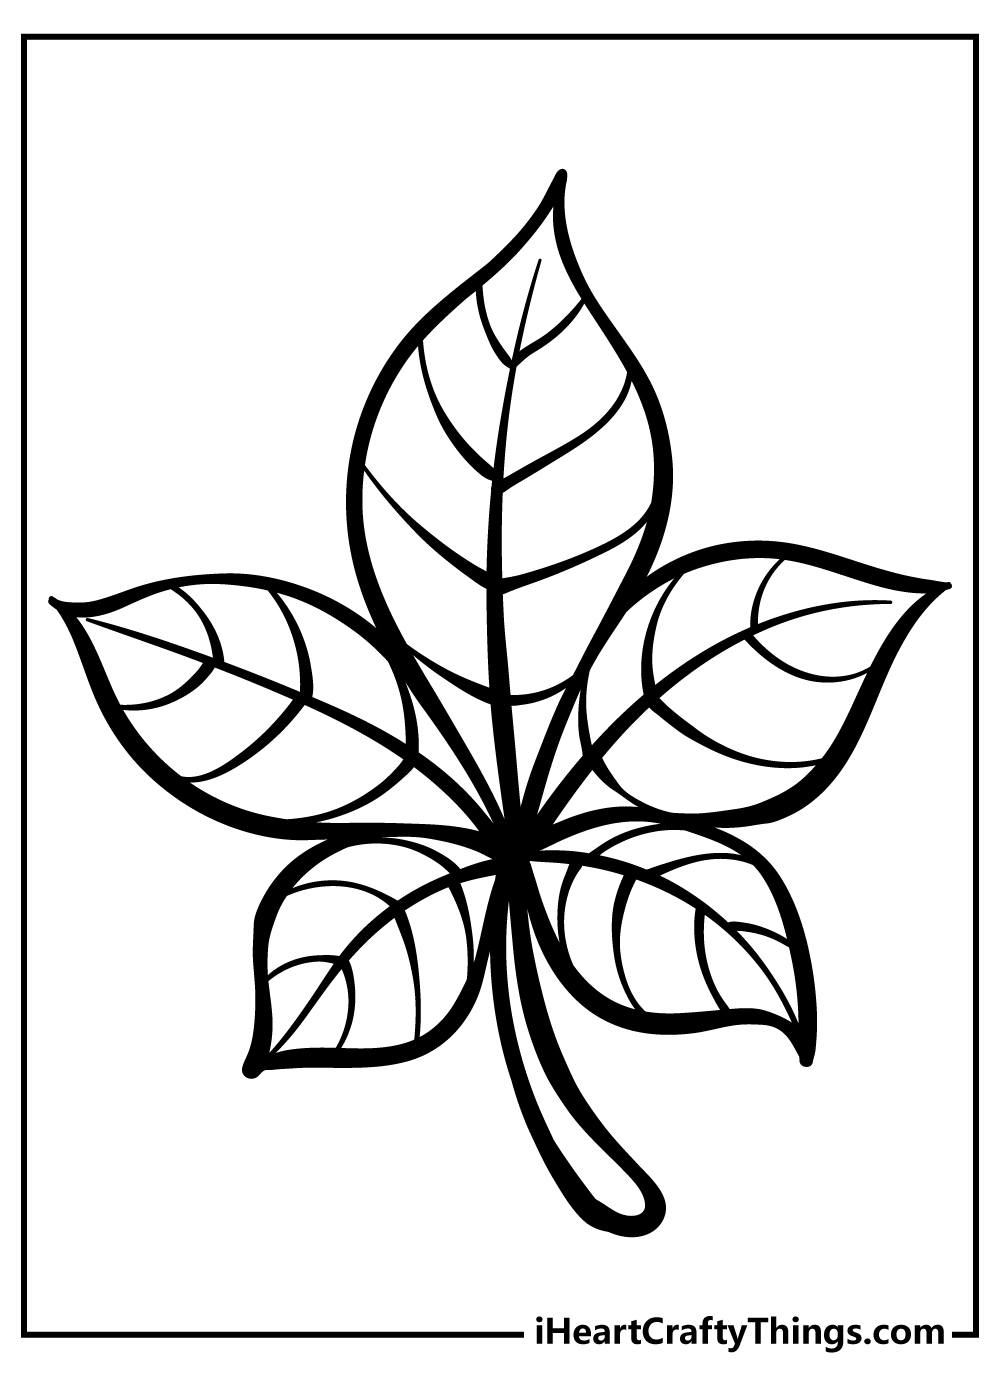 Leaf Coloring Pages free pdf download